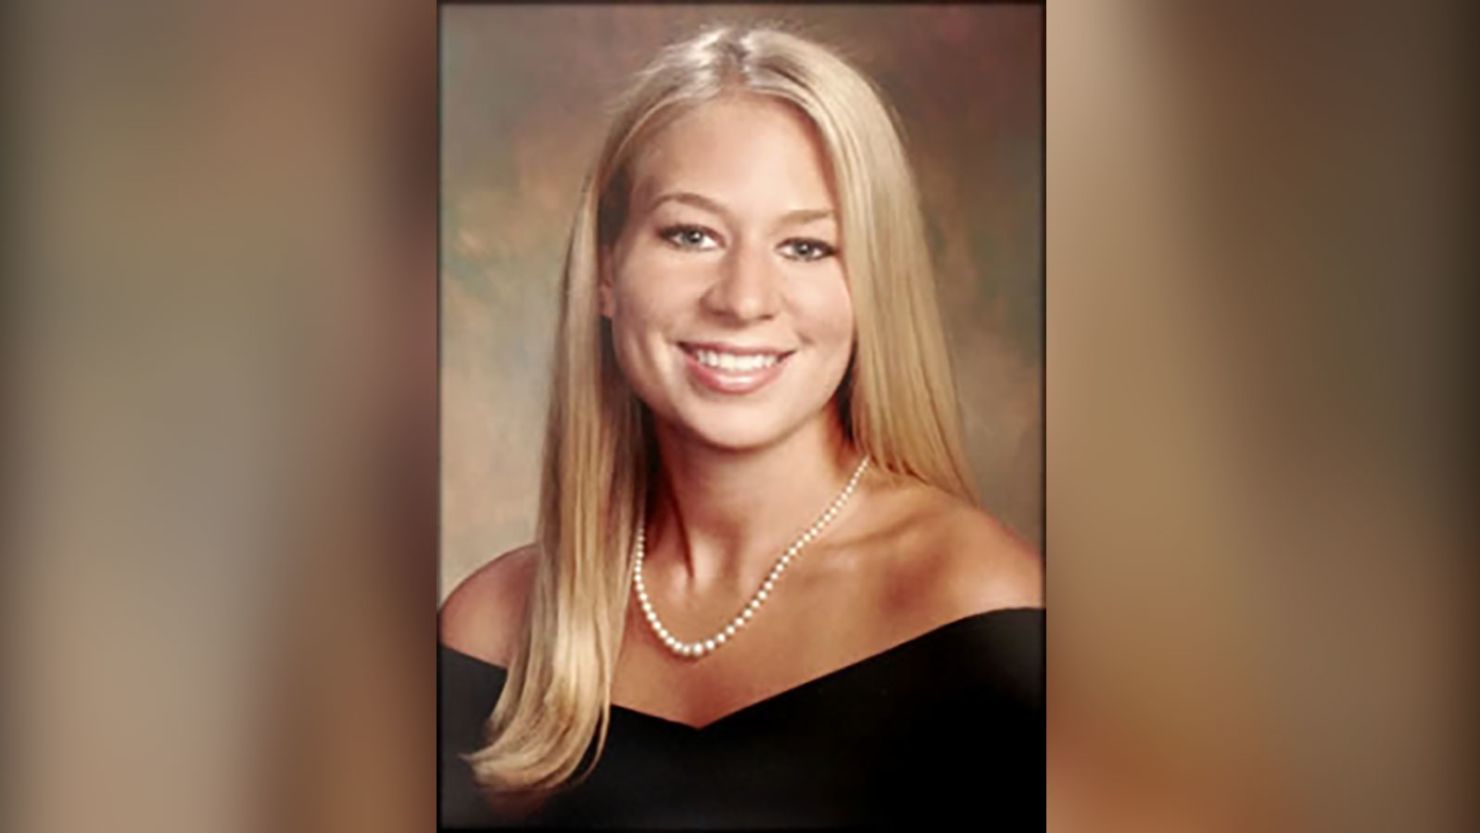 Natalee Holloway, of Alabama, poses for her senior portrait in the Mountain Brook High School yearbook.  